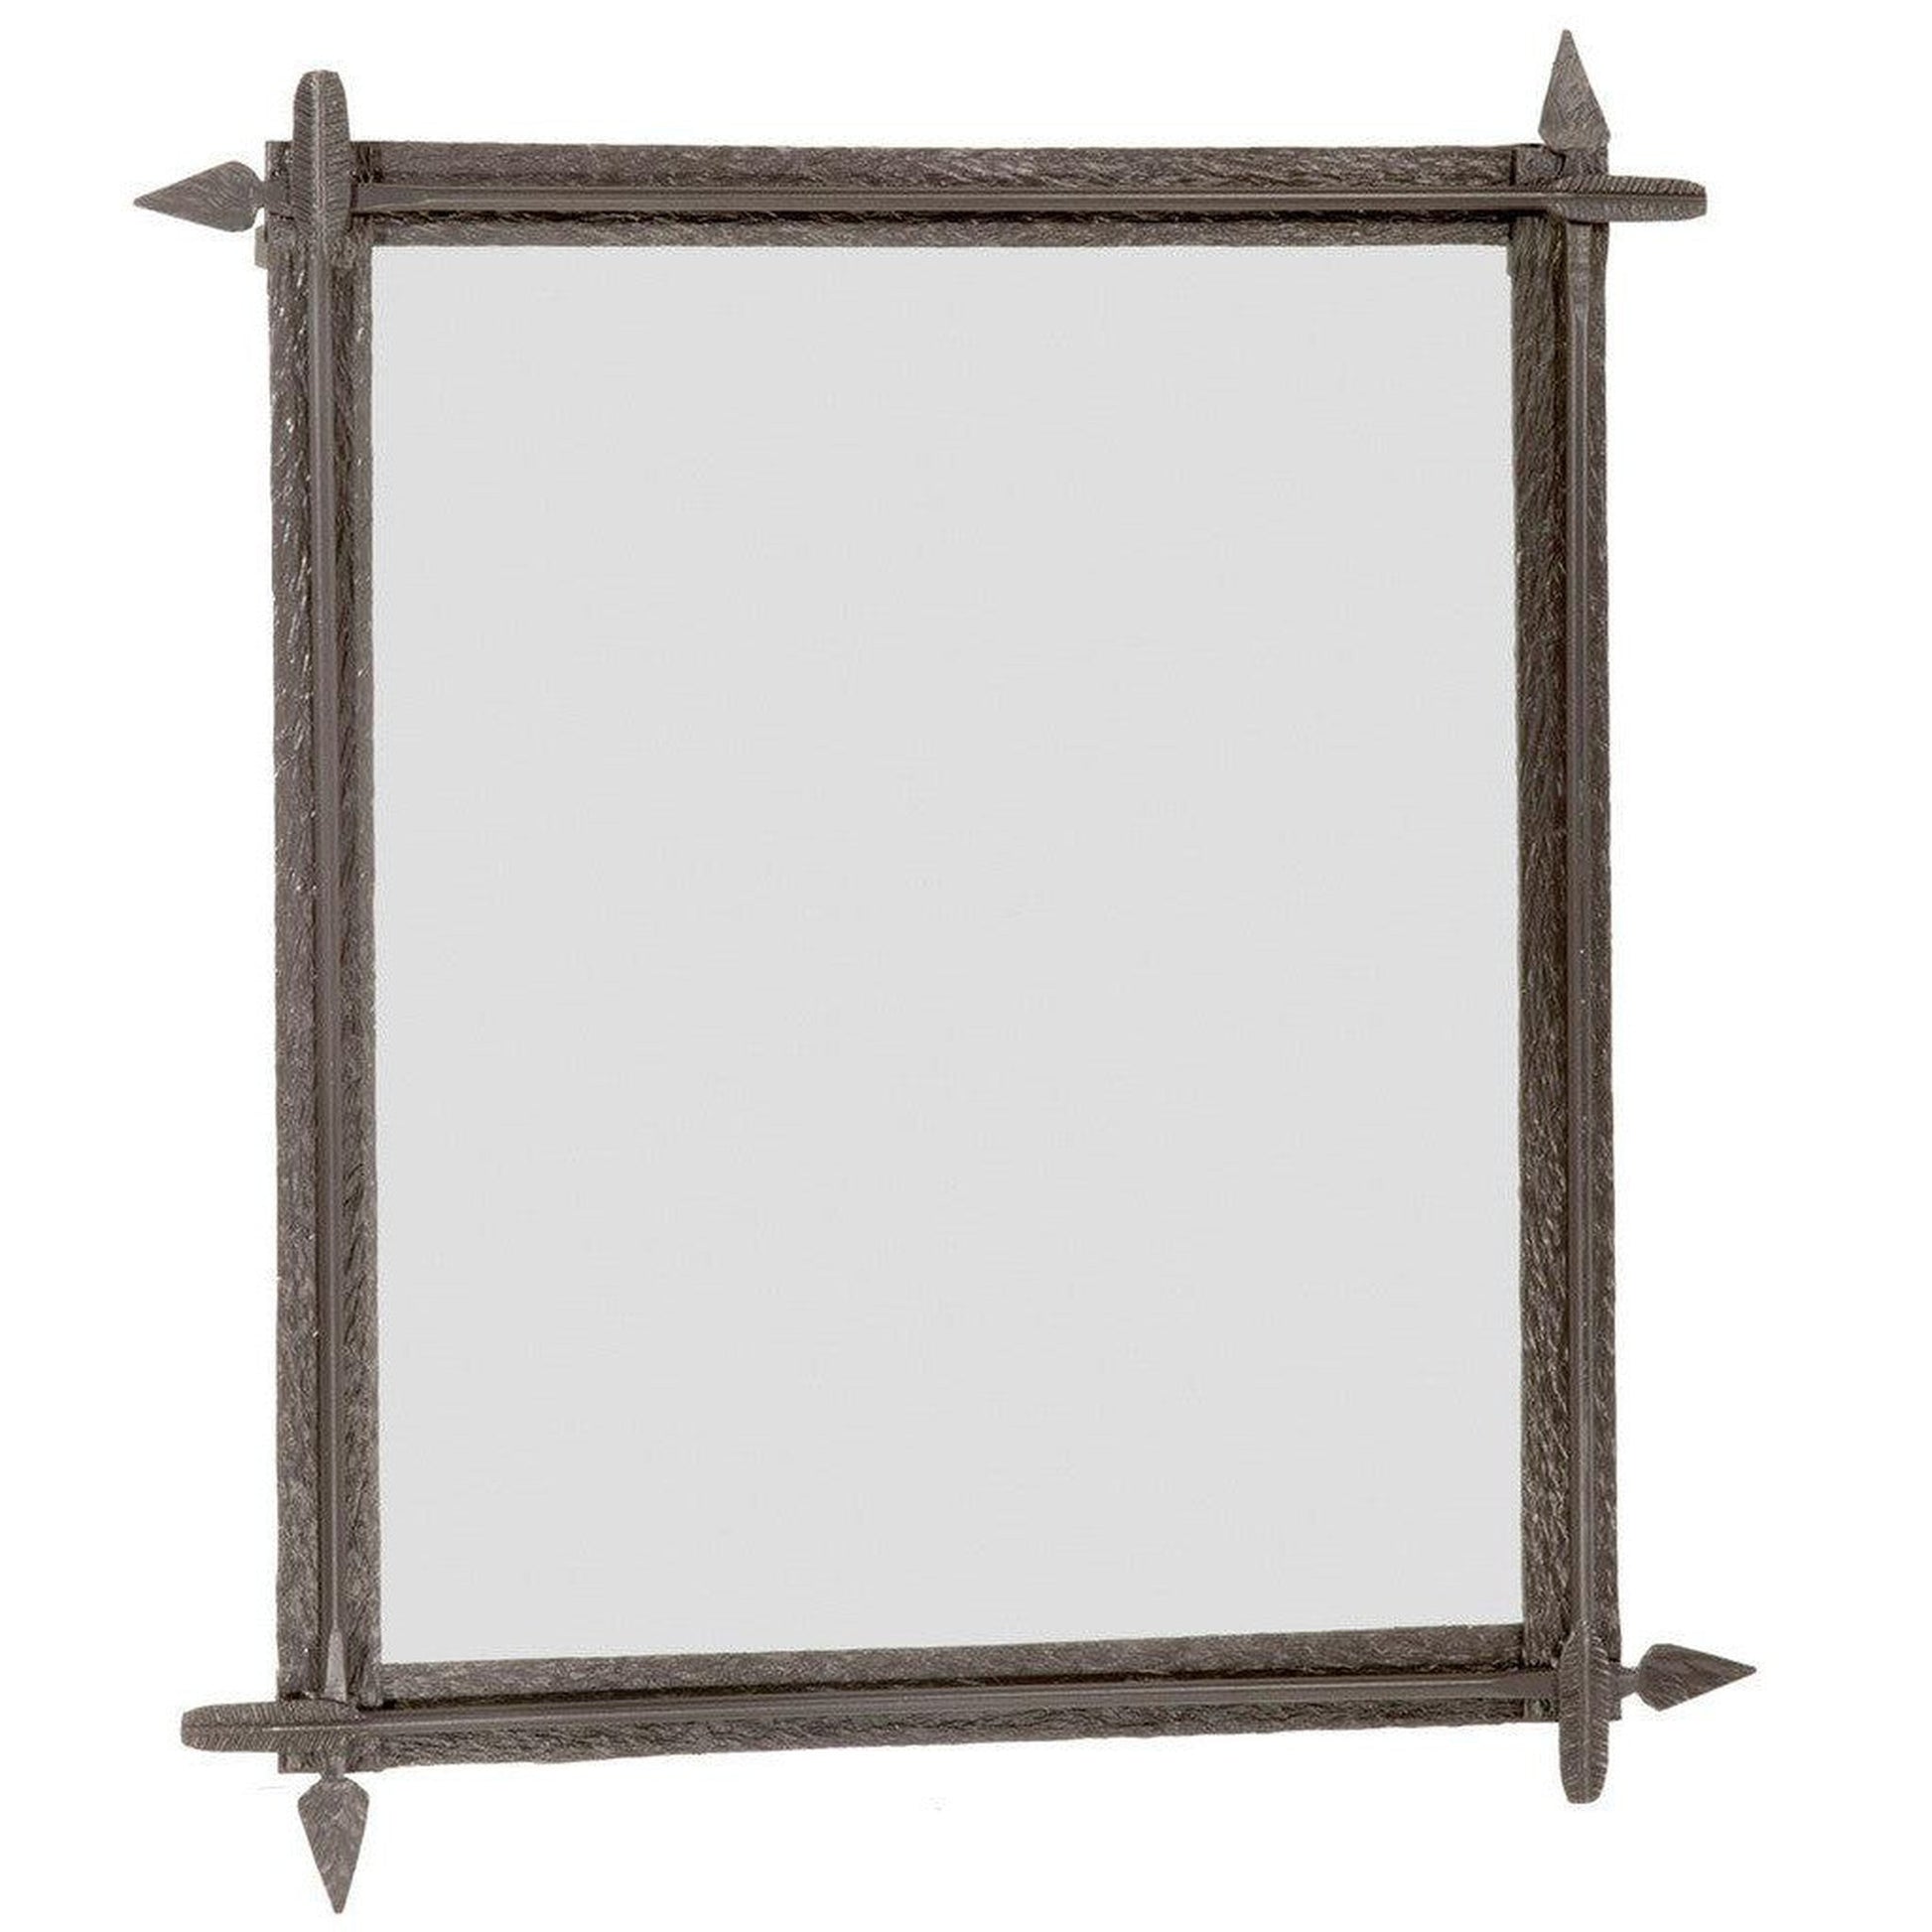 Stone County Ironworks Quapaw 31" x 43" Large Chalk White Iron Wall Mirror With Pewter Iron Accent